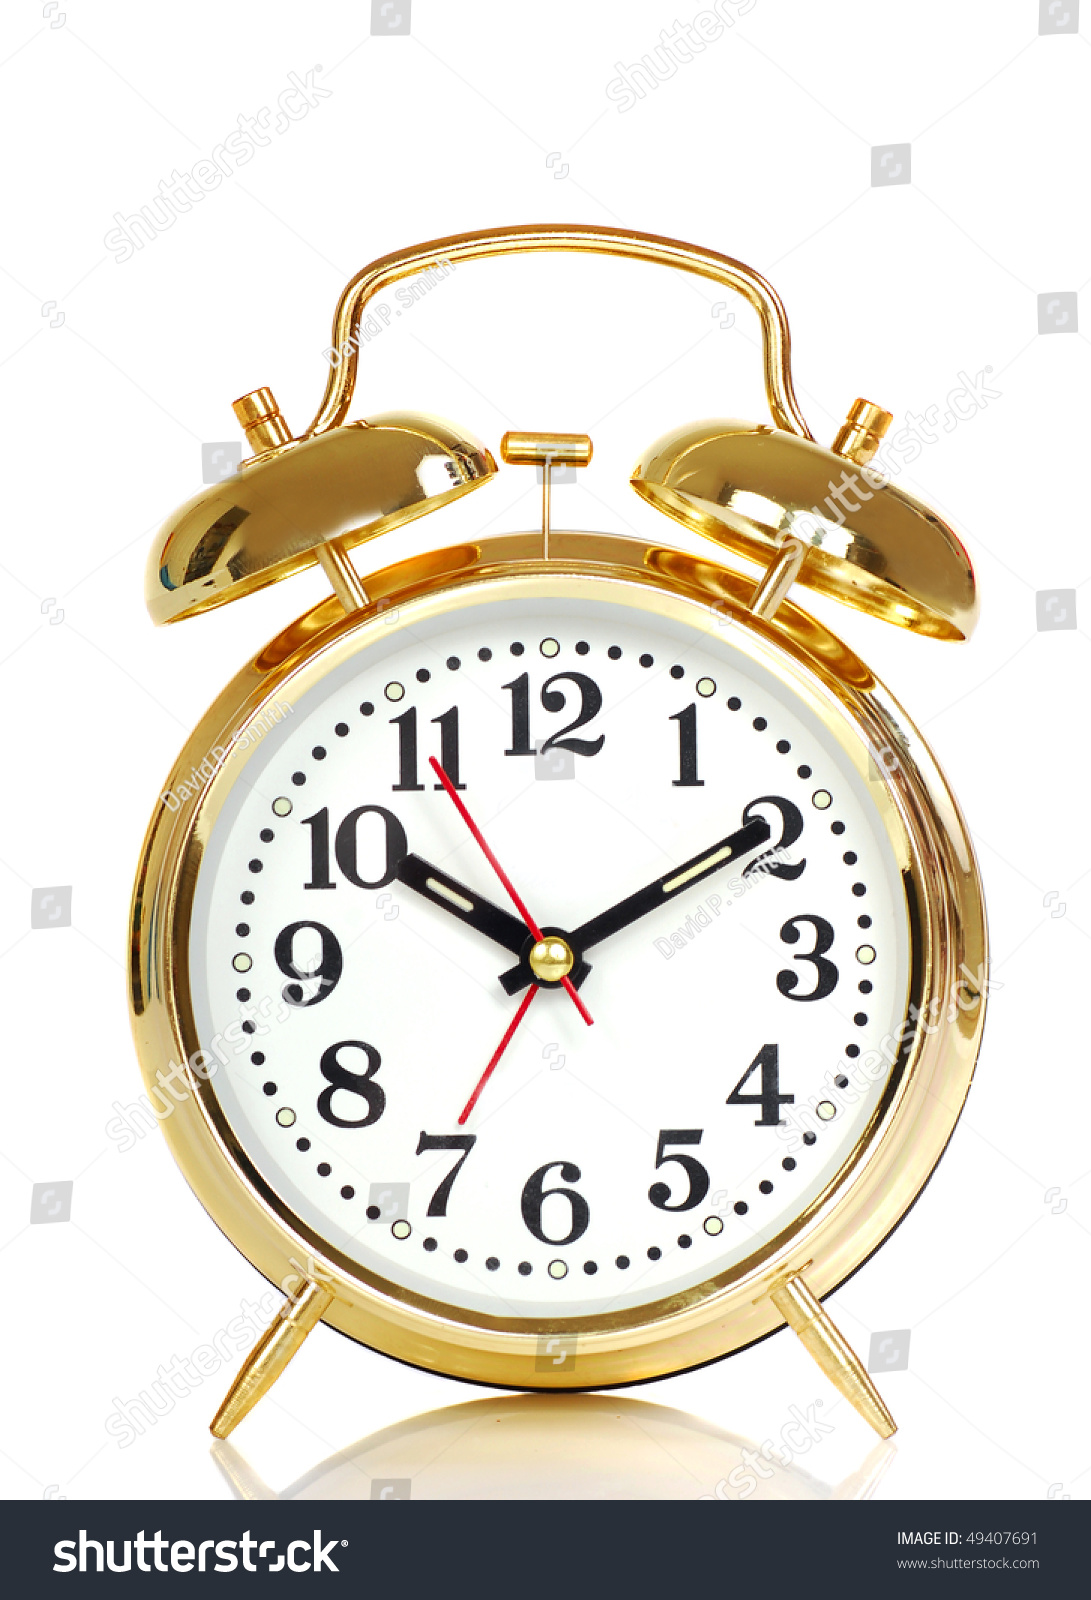 Old Fashioned Bell Alarm Clock Isolated Stock Photo 49407691 - Shutterstock1091 x 1600